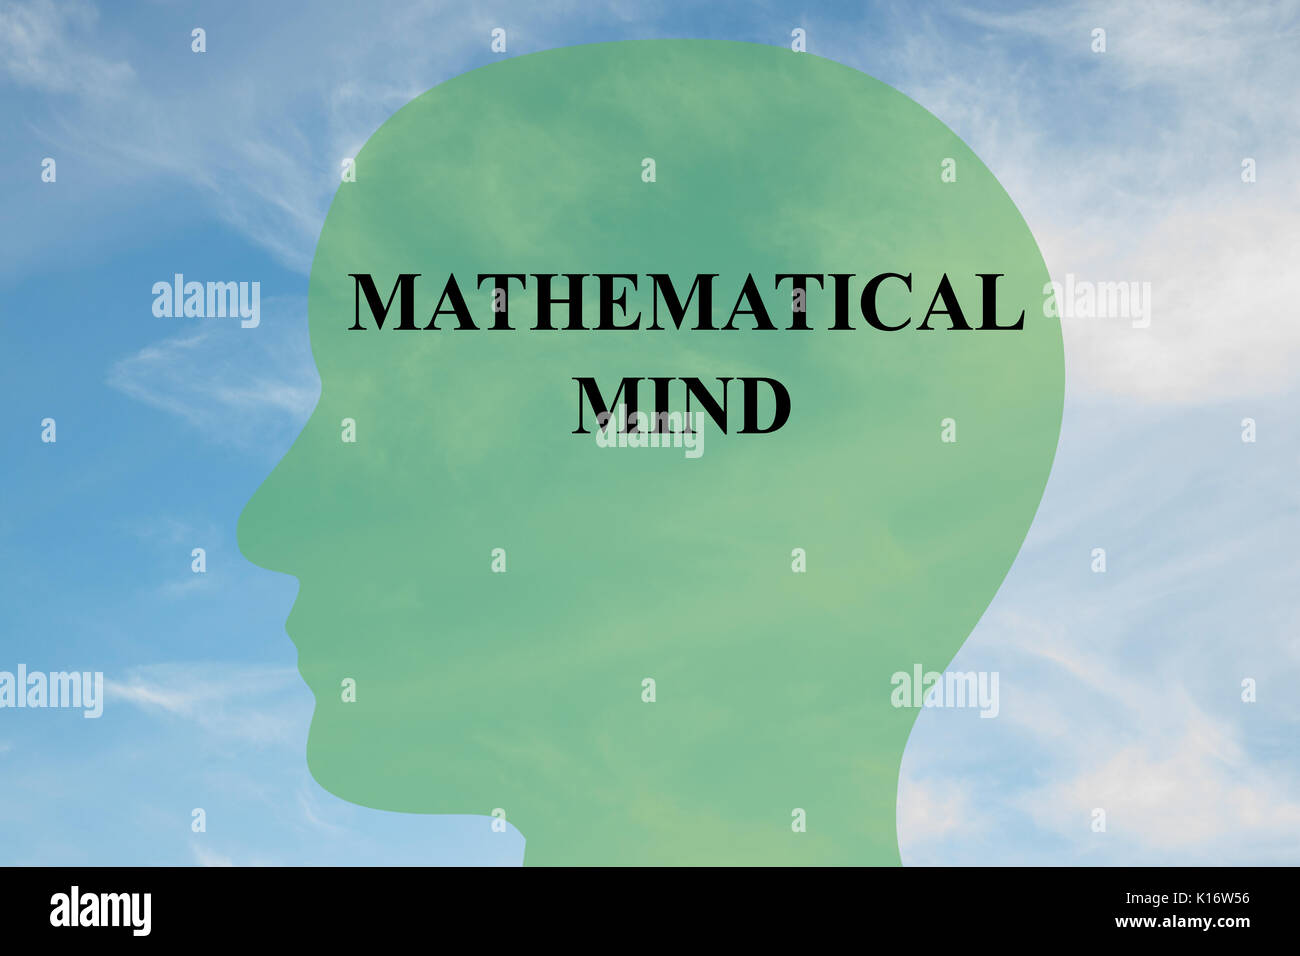 Render illustration of "MATHEMATICAL MIND" script on head silhouette, with cloudy sky as a background. Stock Photo